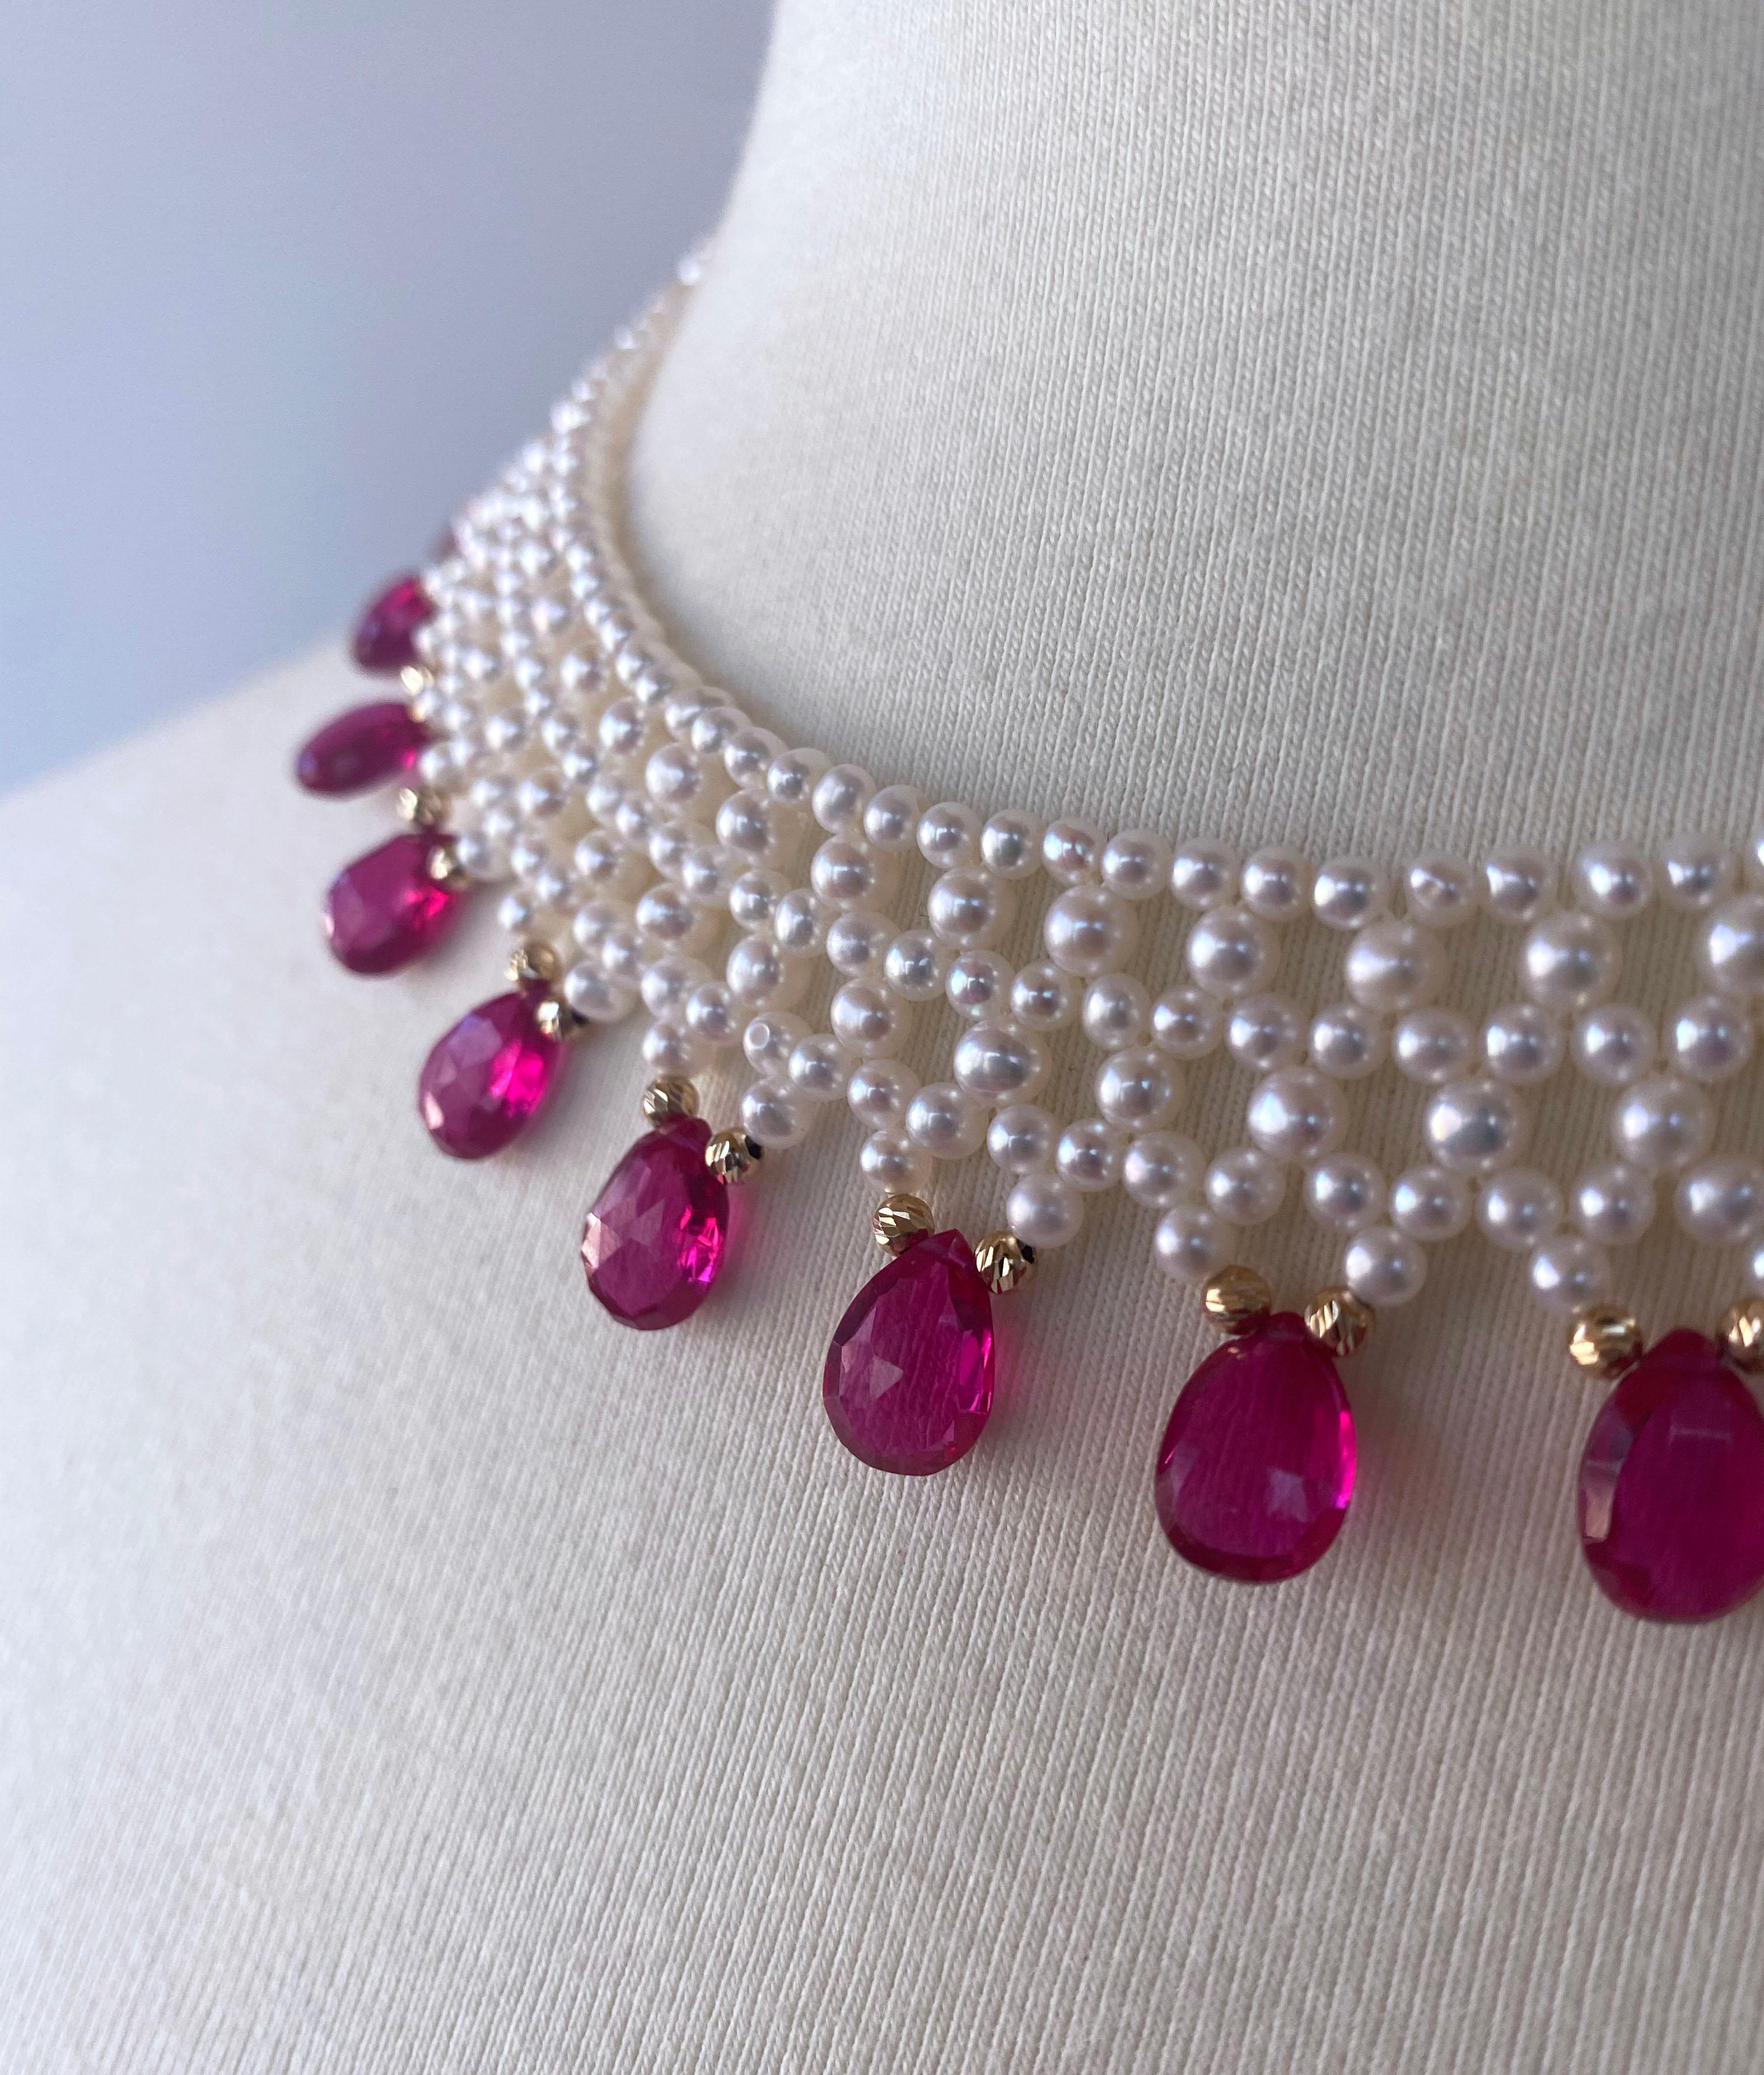 Artisan Marina J Woven Pearl Necklace with Pink Sapphire brioletts  & 14 k Yellow Gold